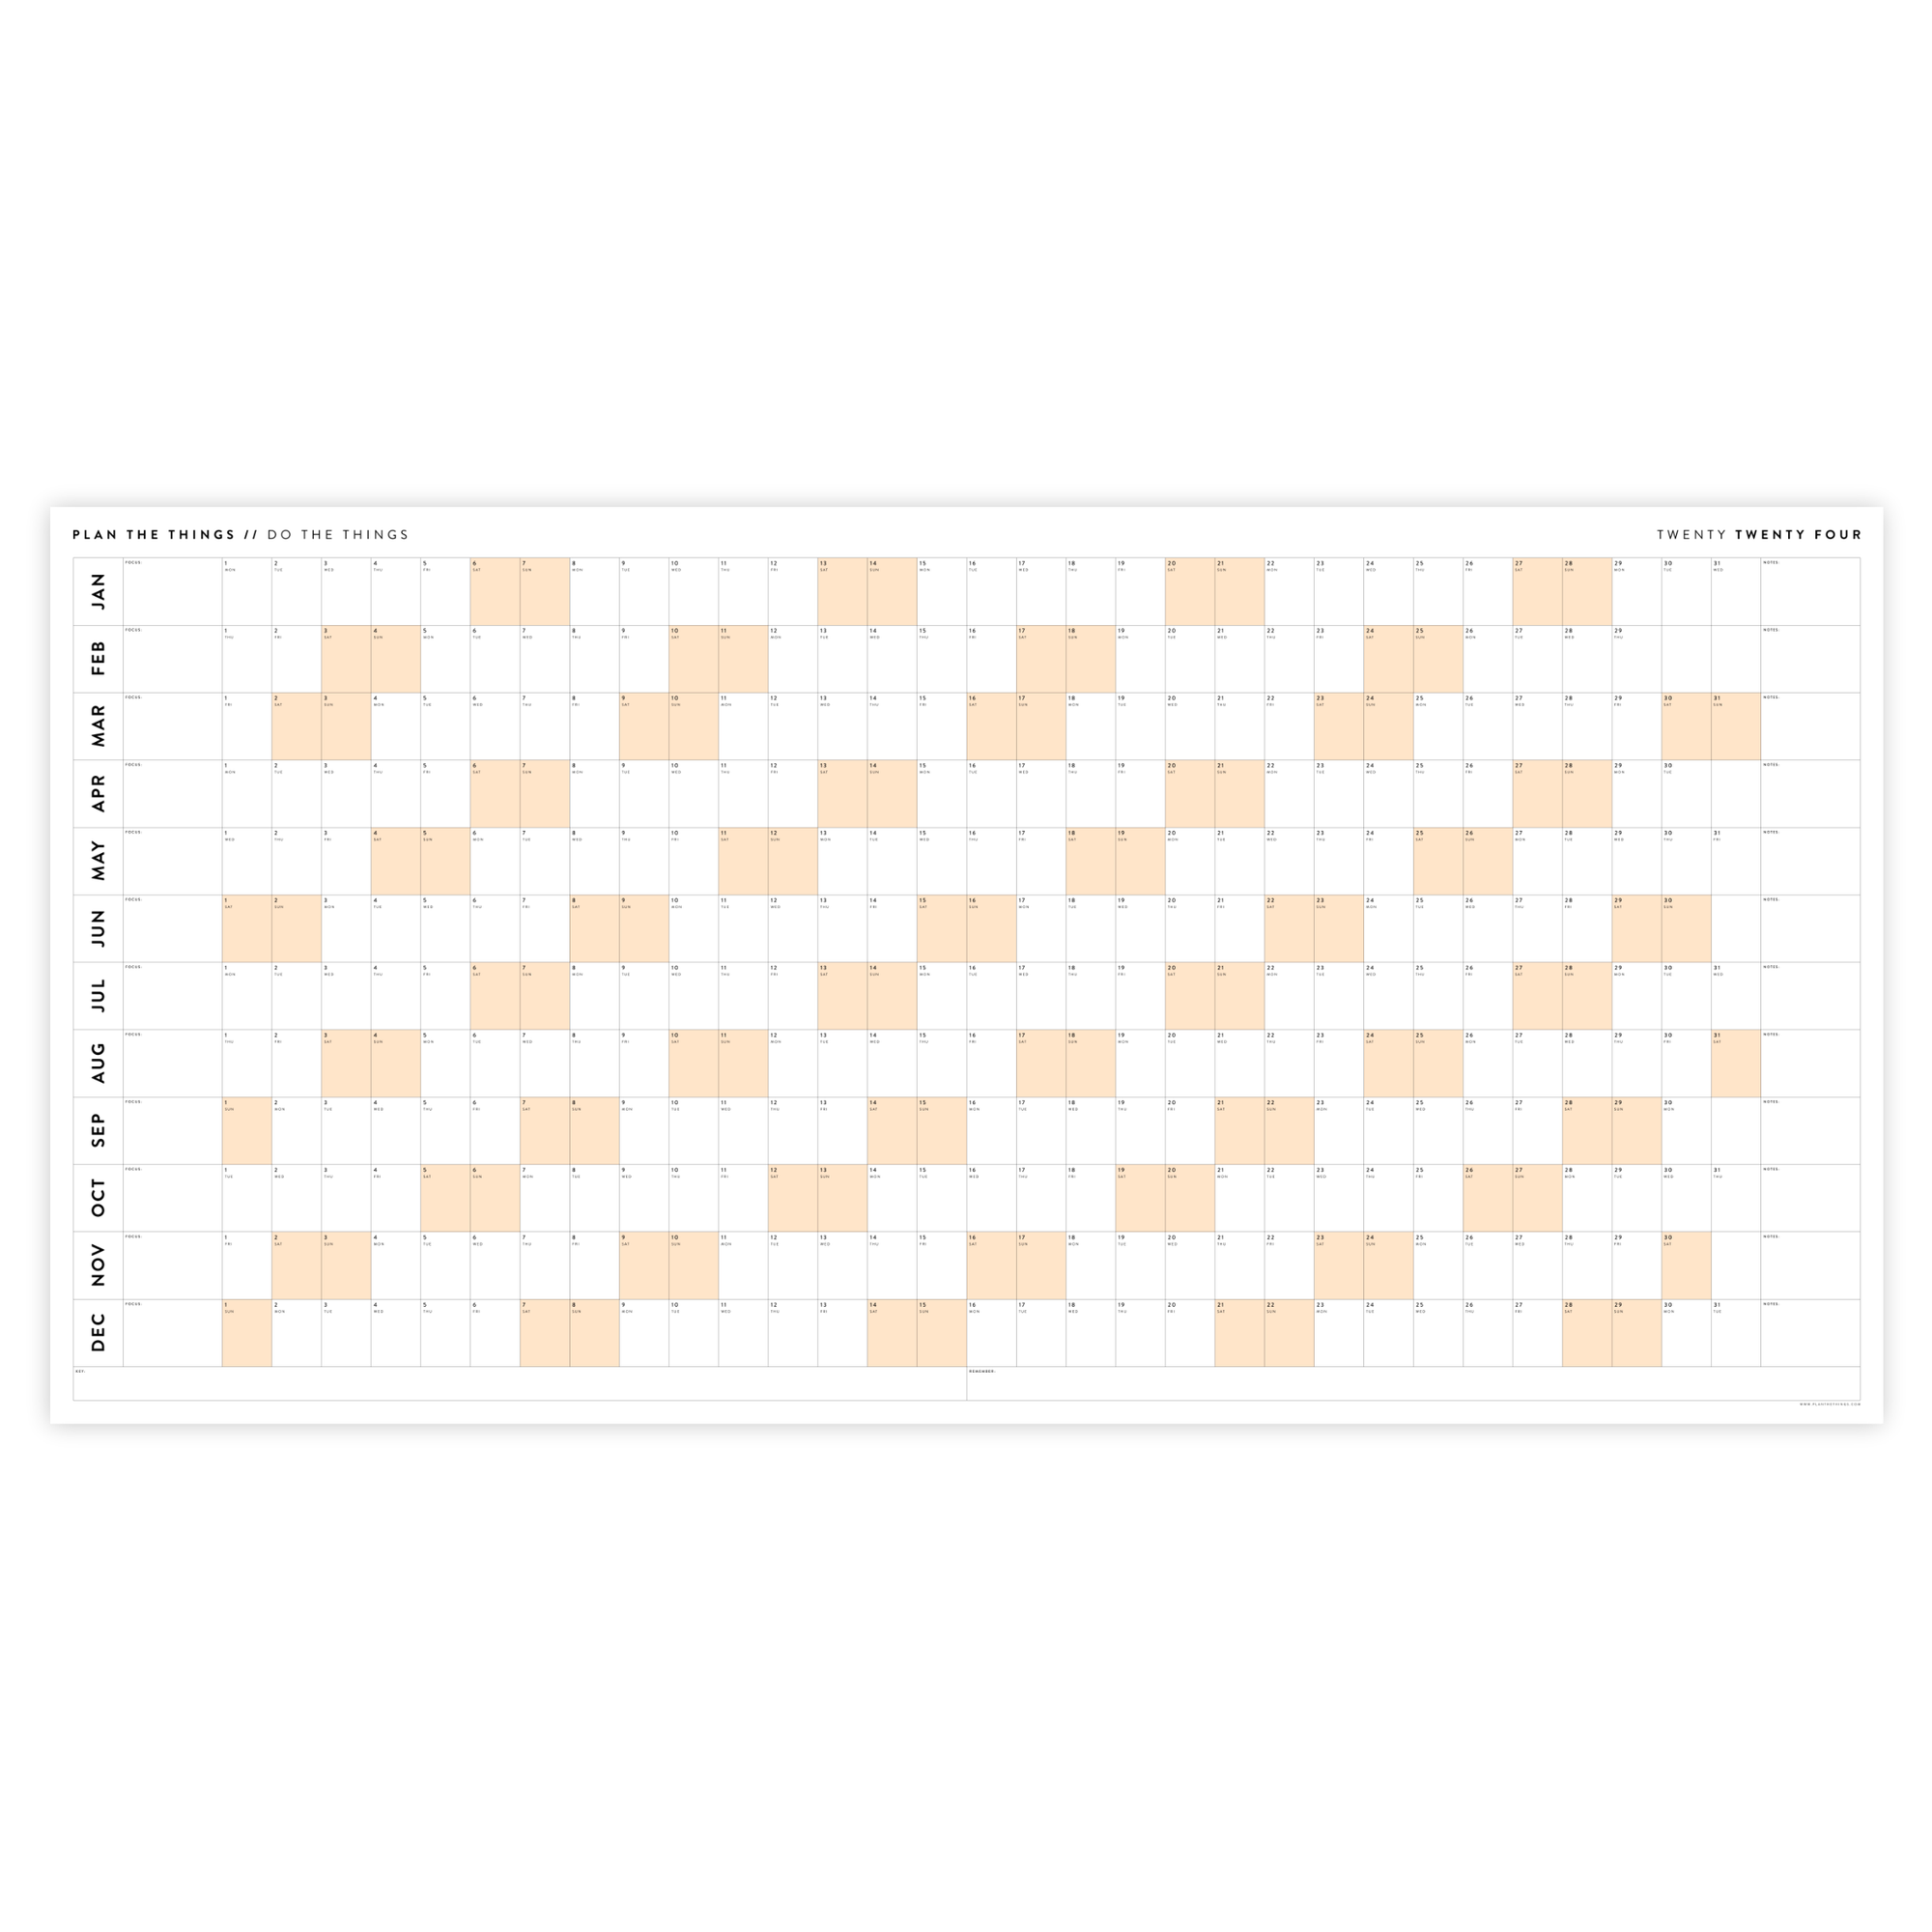 PRINTABLE 6' x 3' MASSIVE 2024 WALL CALENDAR WITH ORANGE WEEKENDS - INSTANT DOWNLOAD